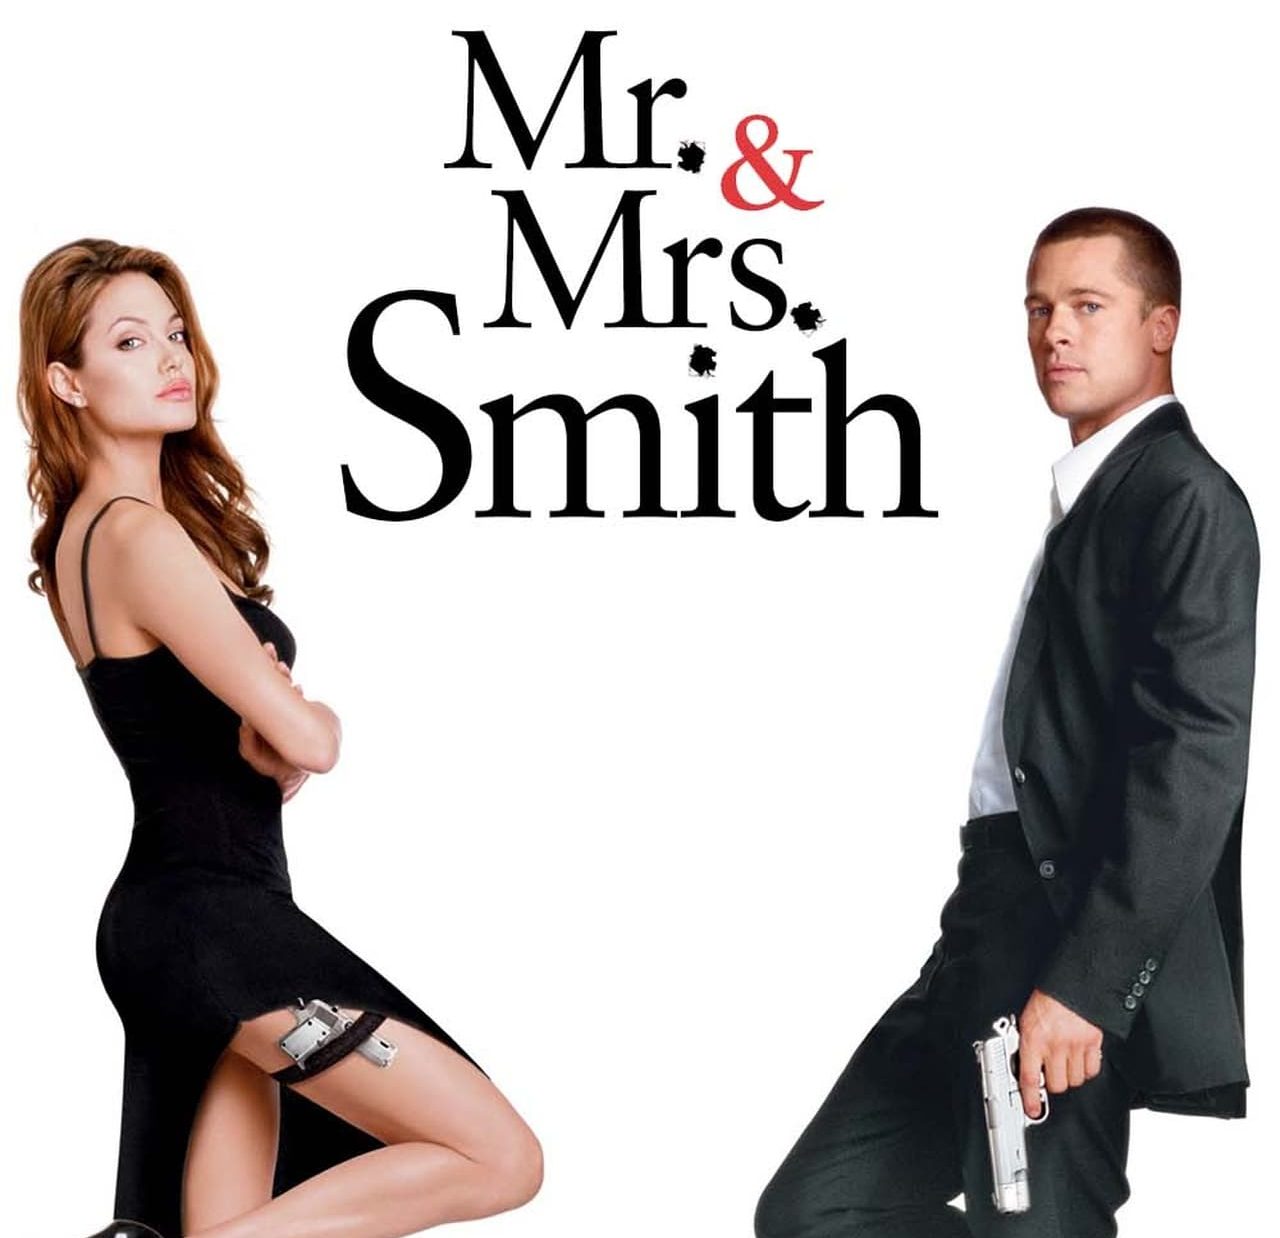 Brad Pitt and Angelina Jolie in 'Mr. And Mrs. Smith' (2005)